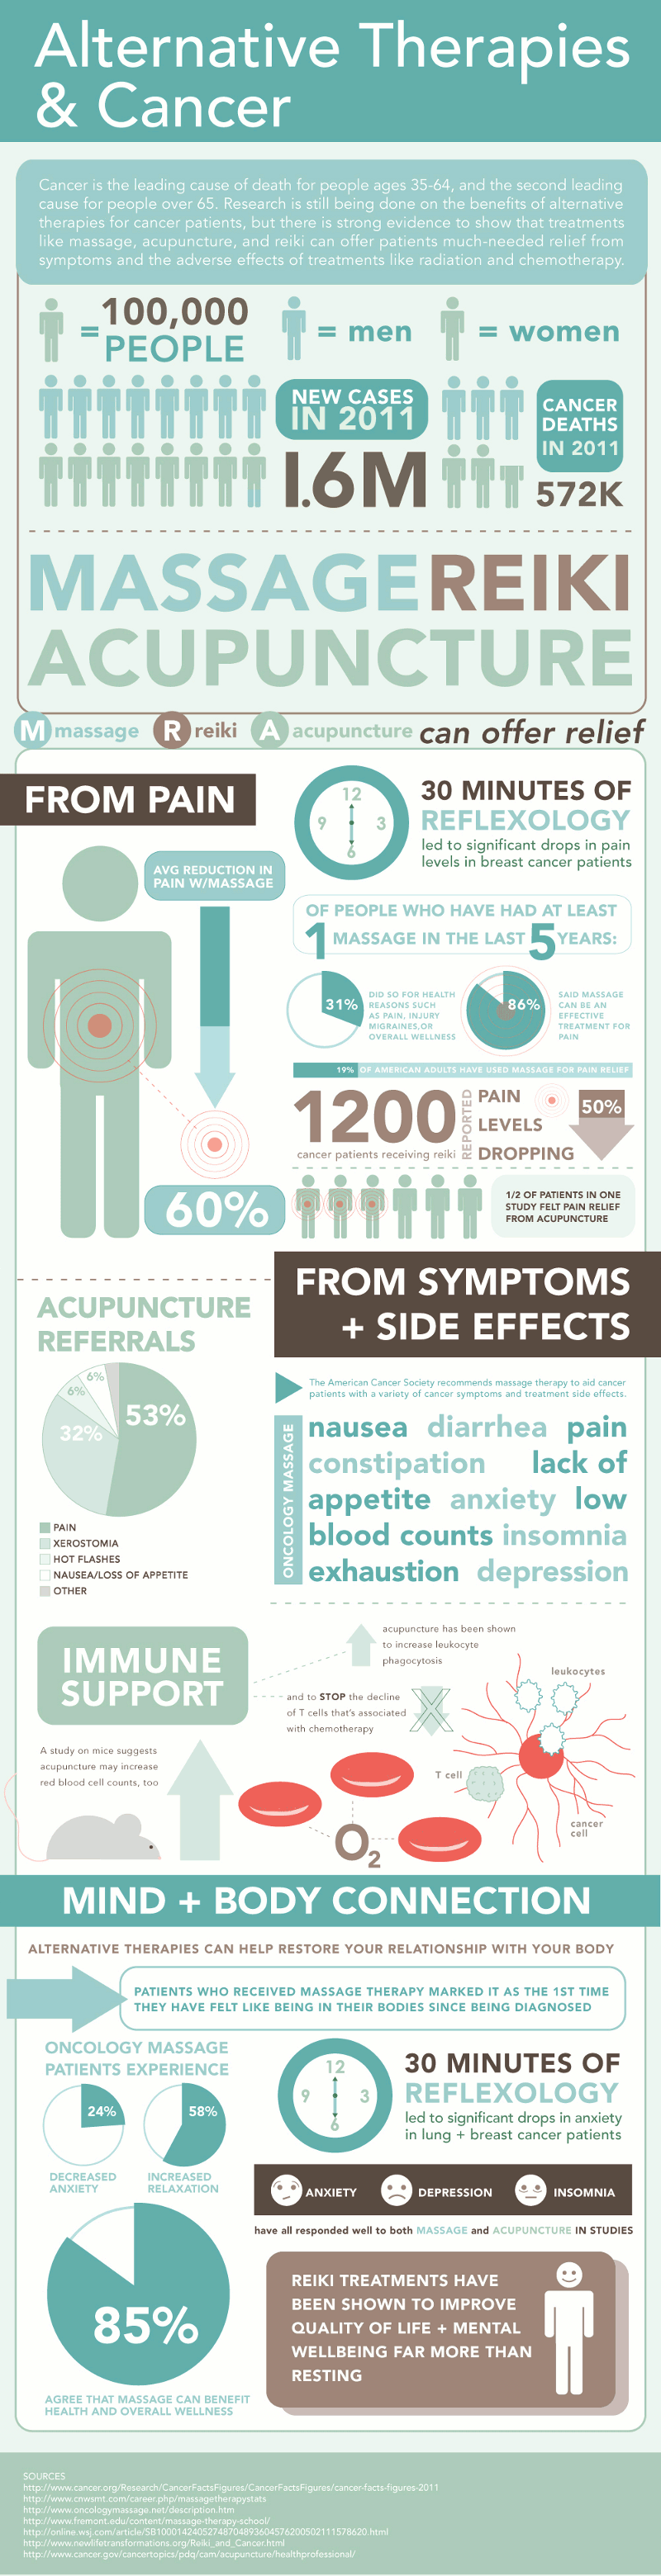 Alternative Therapies and Acupuncture Facts